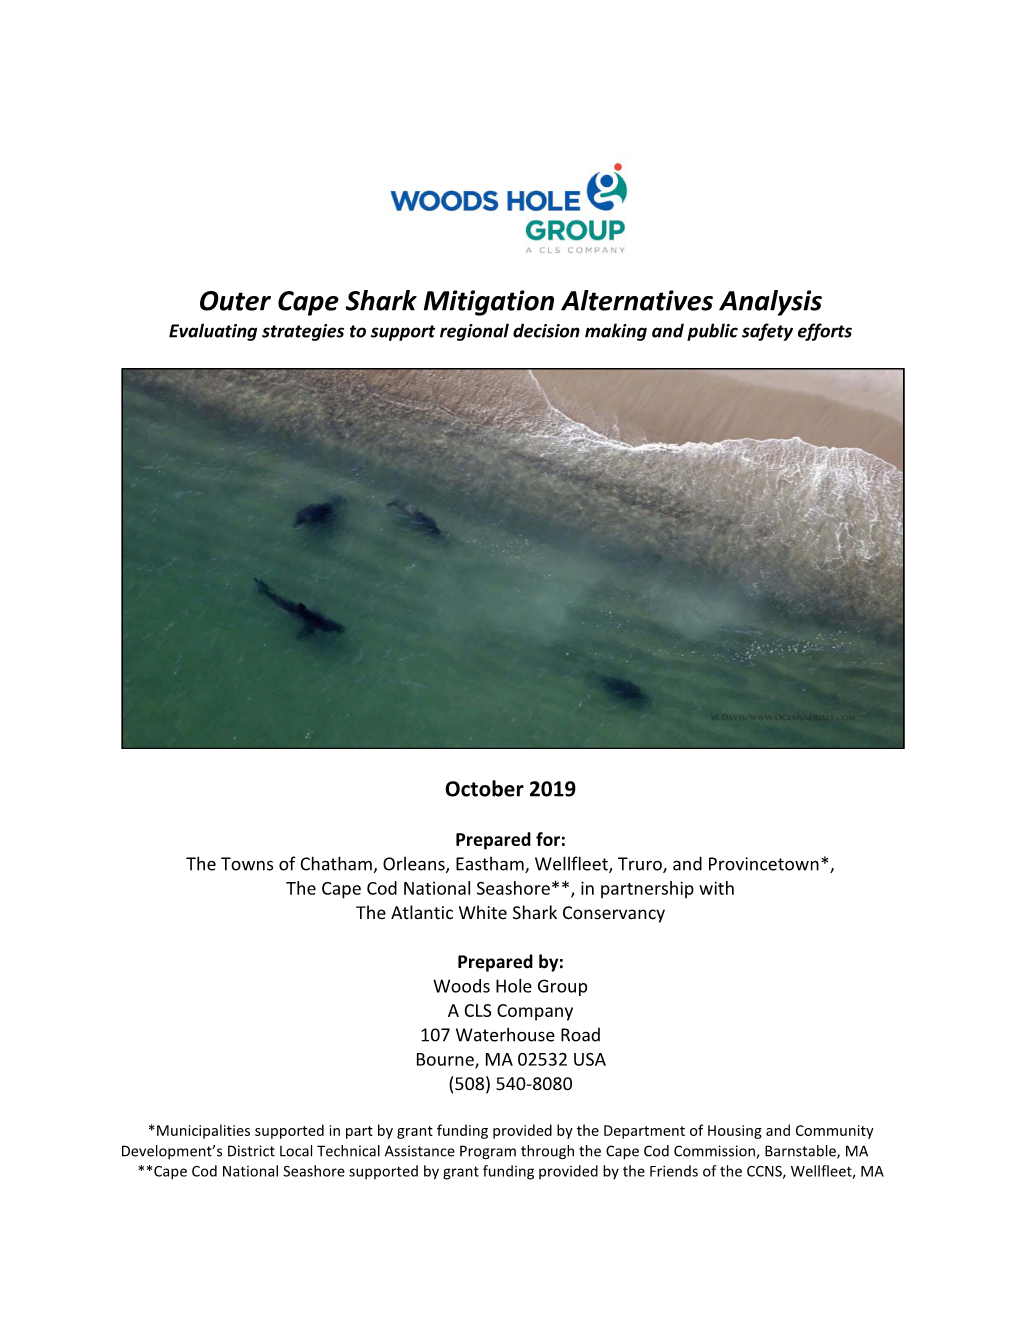 Outer Cape Shark Mitigation Alternatives Analysis Evaluating Strategies to Support Regional Decision Making and Public Safety Efforts